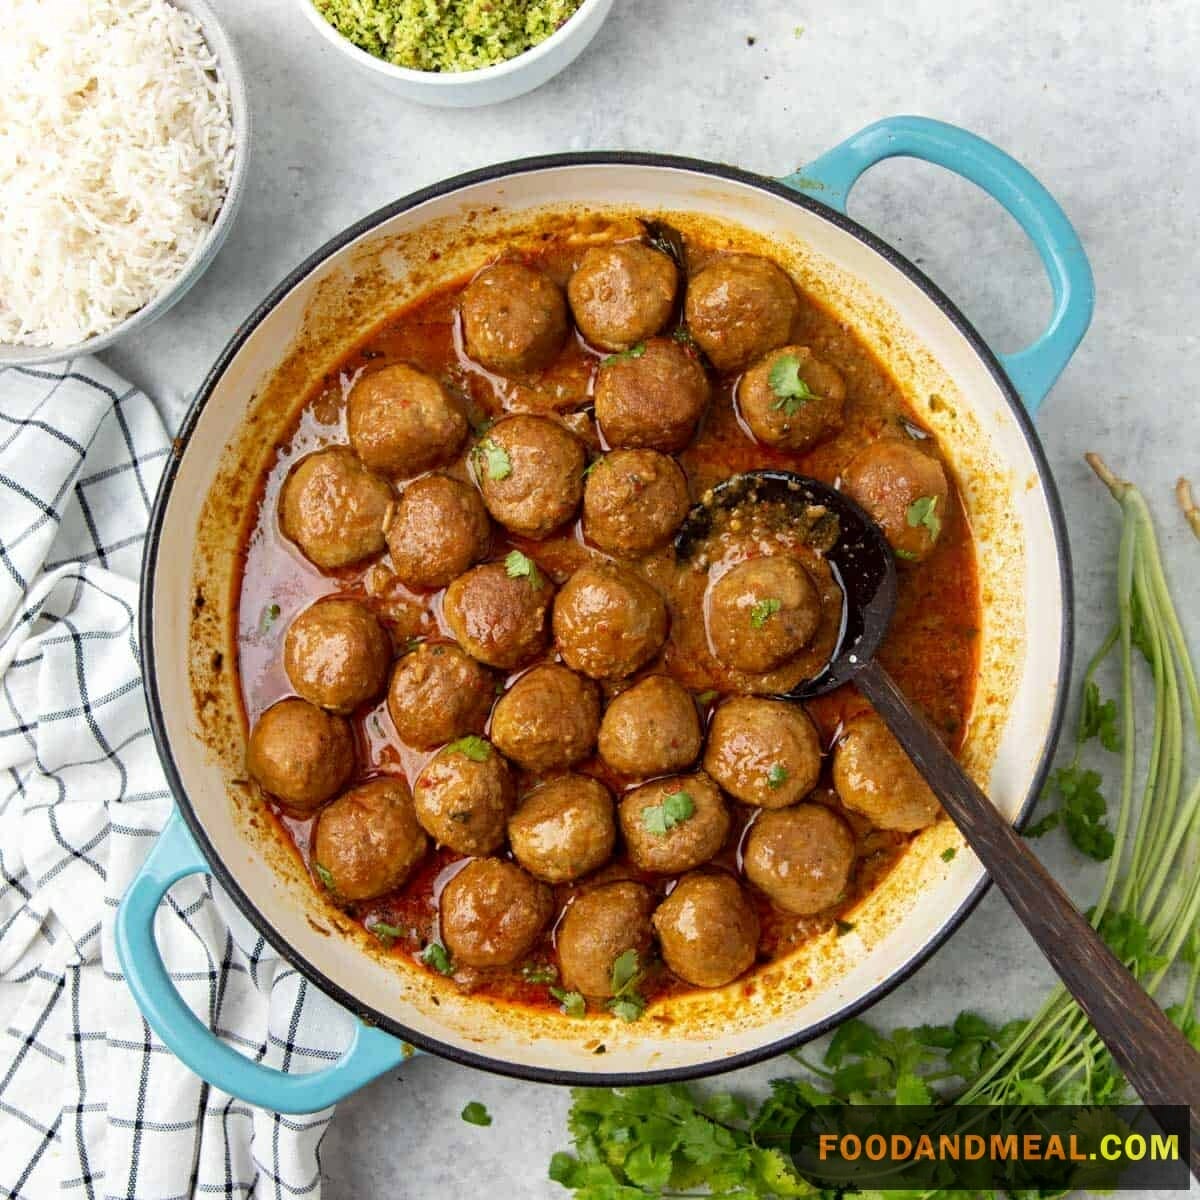 Thai Red Meatball Curry